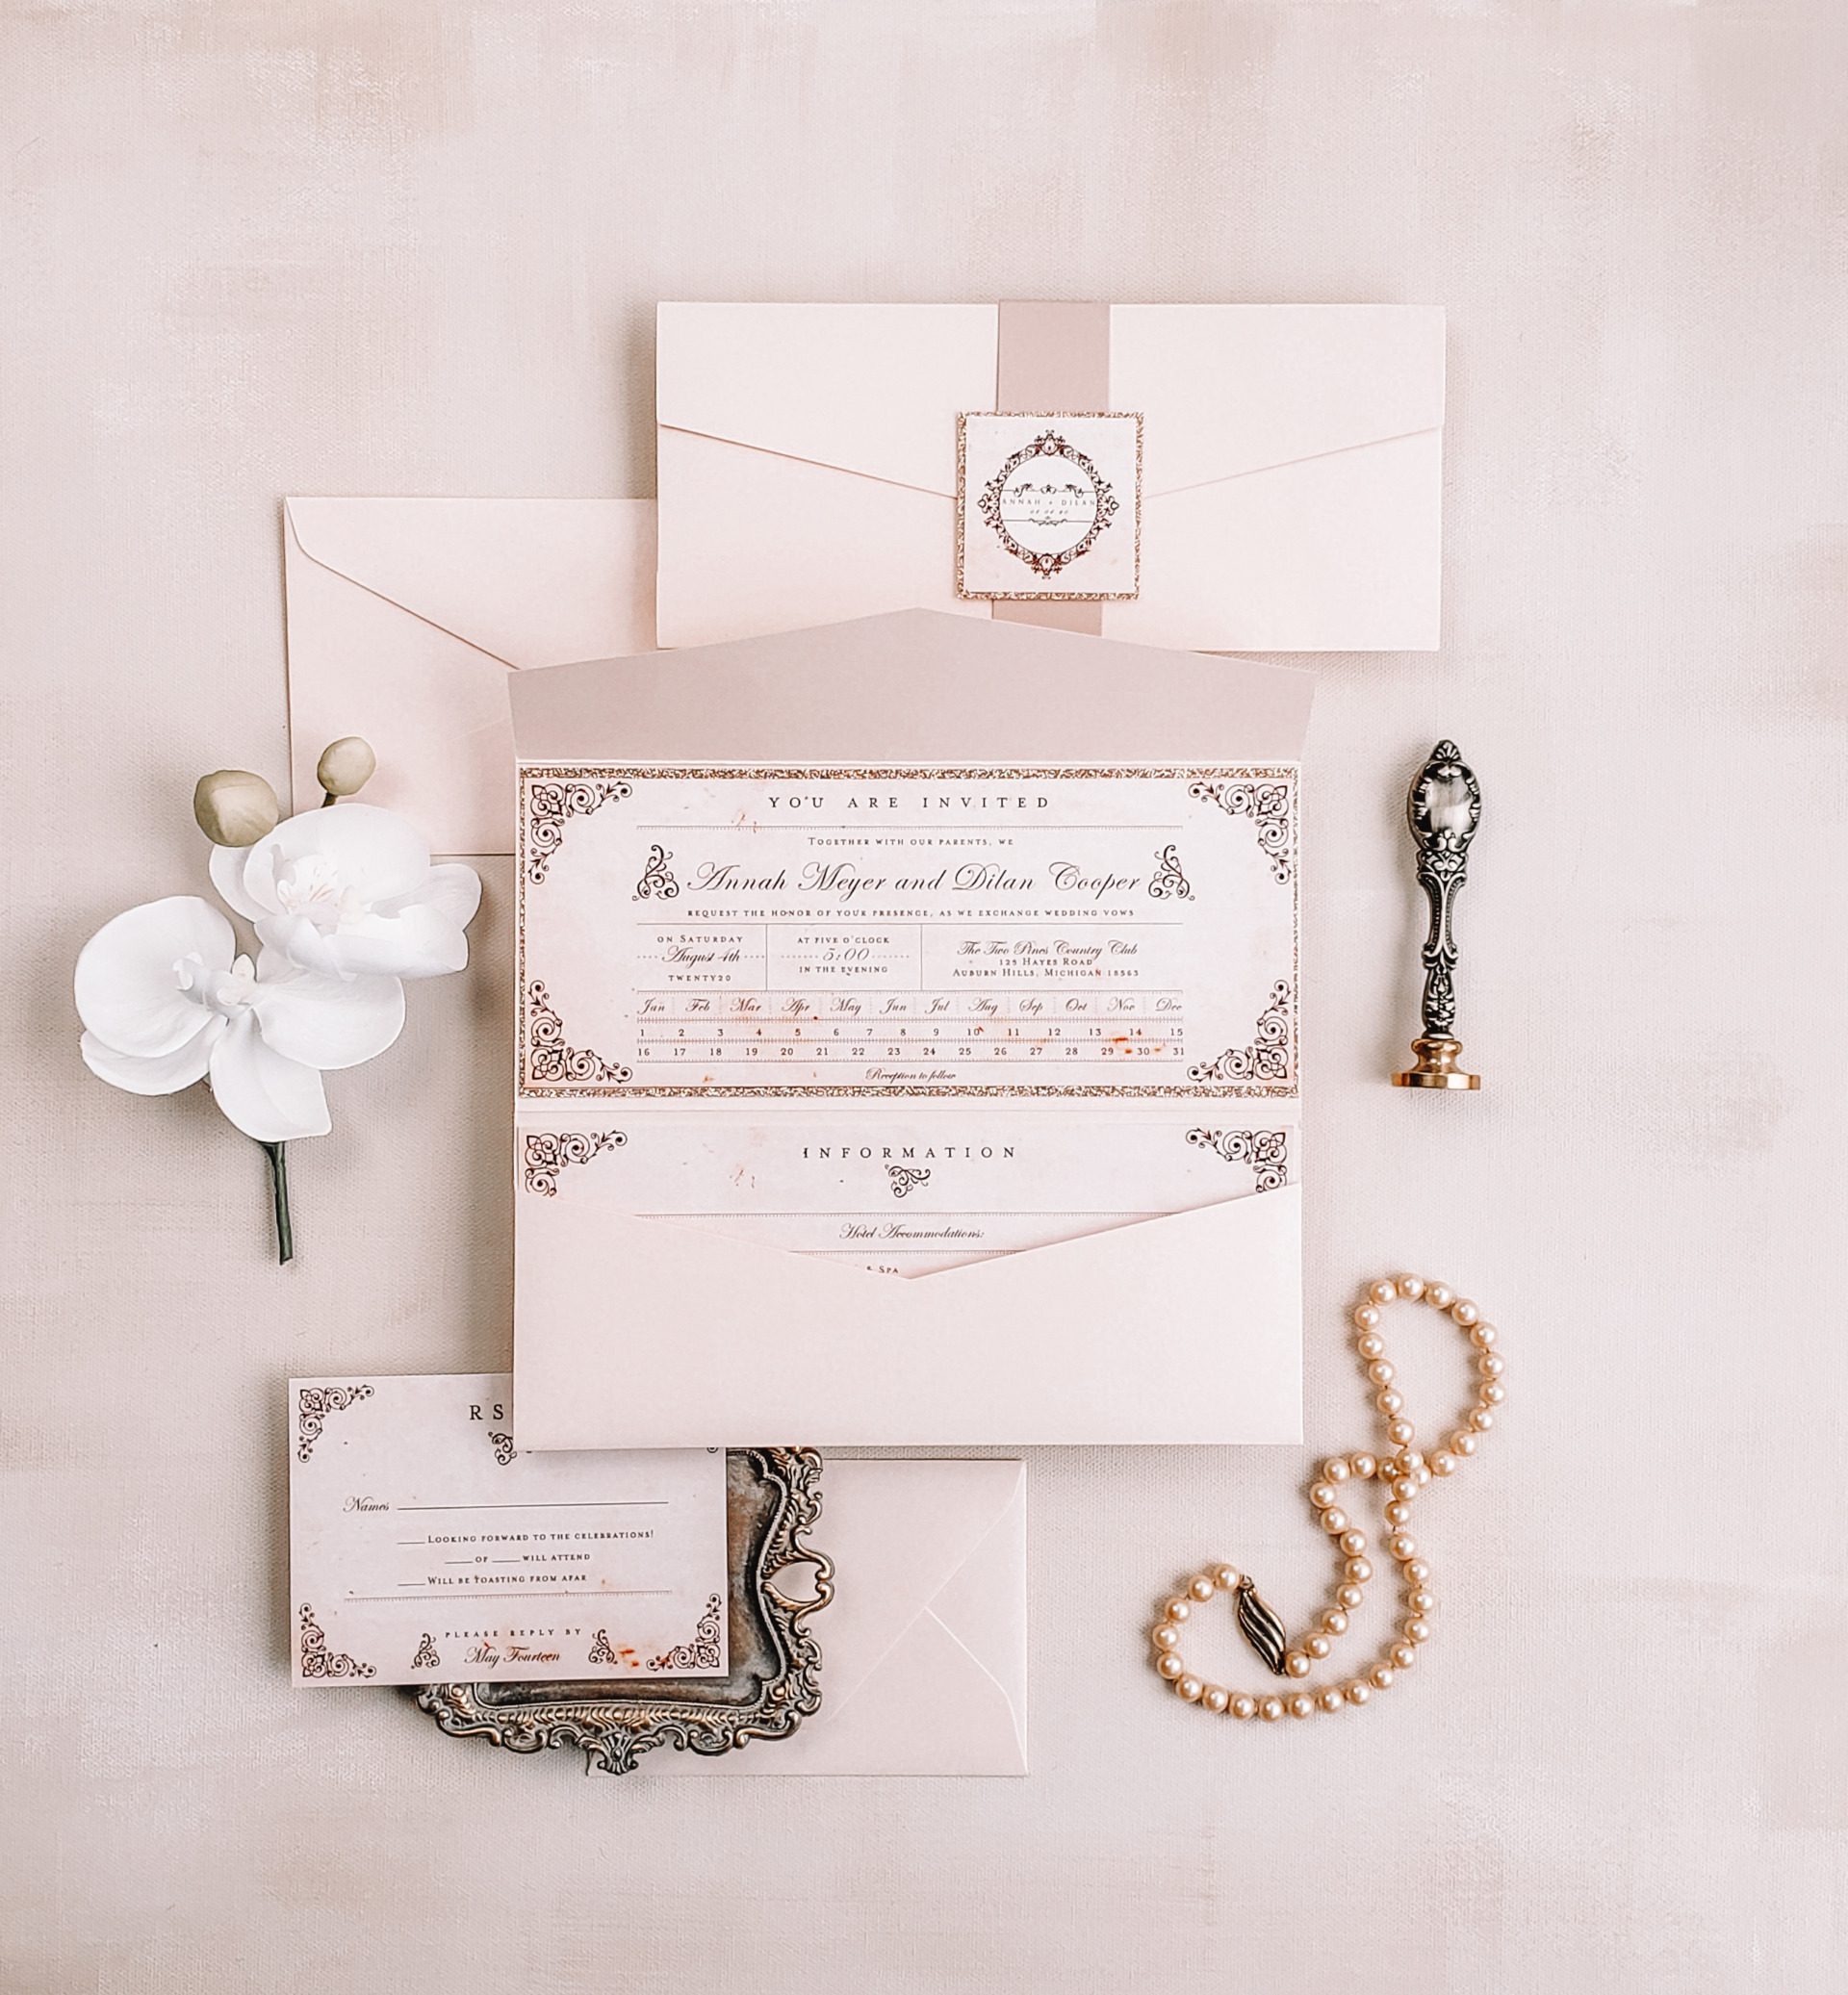 [vc_row][vc_column][vc_column_text]Purchase this listing to get a sample of our New Orleans wedding invitation suite.

The sample includes:

• 9